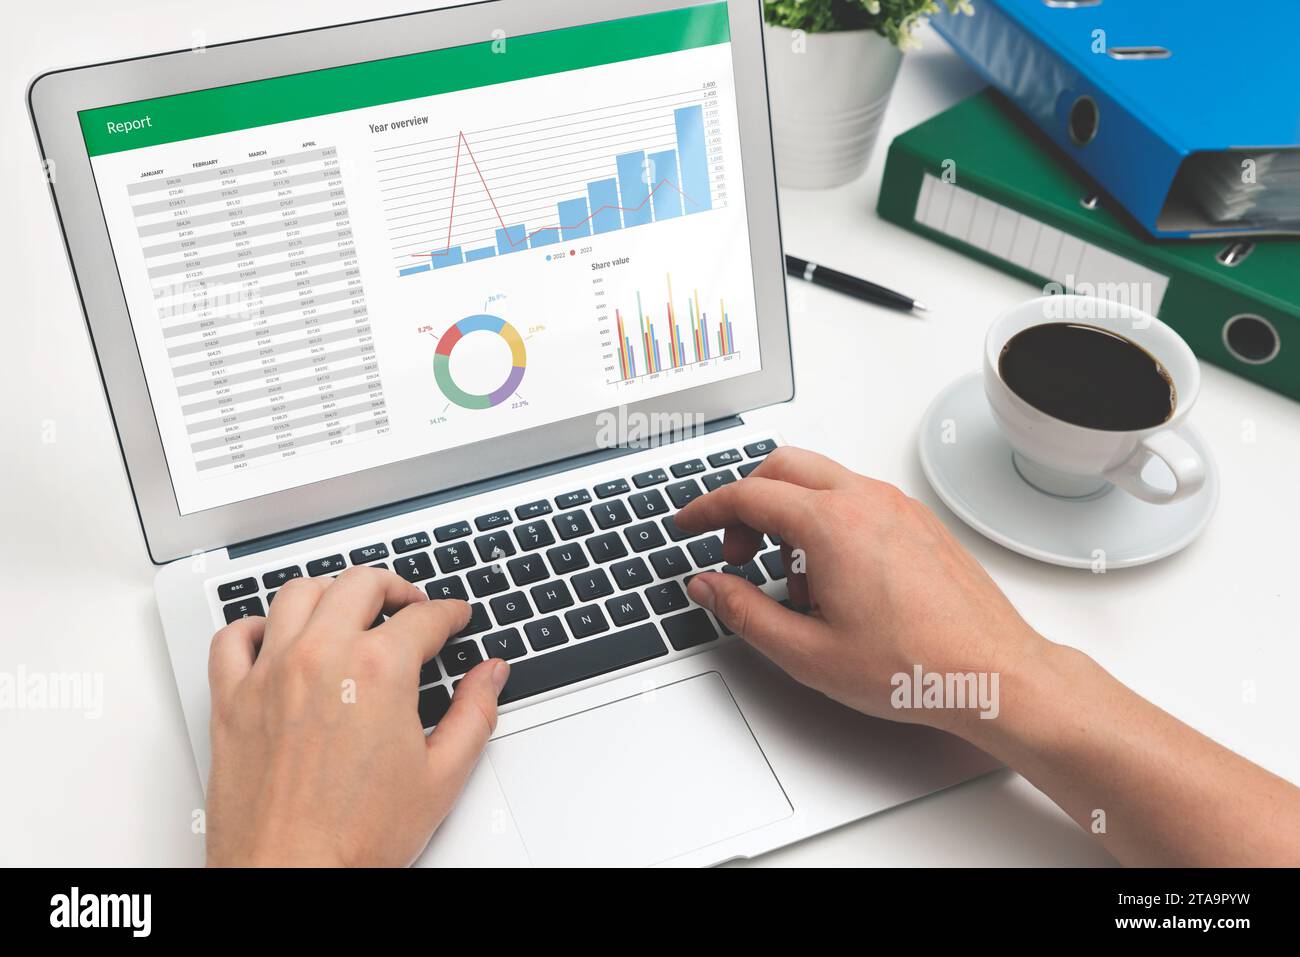 Analyst uses spreadsheet for calculations. Workplace closeup Stock Photo